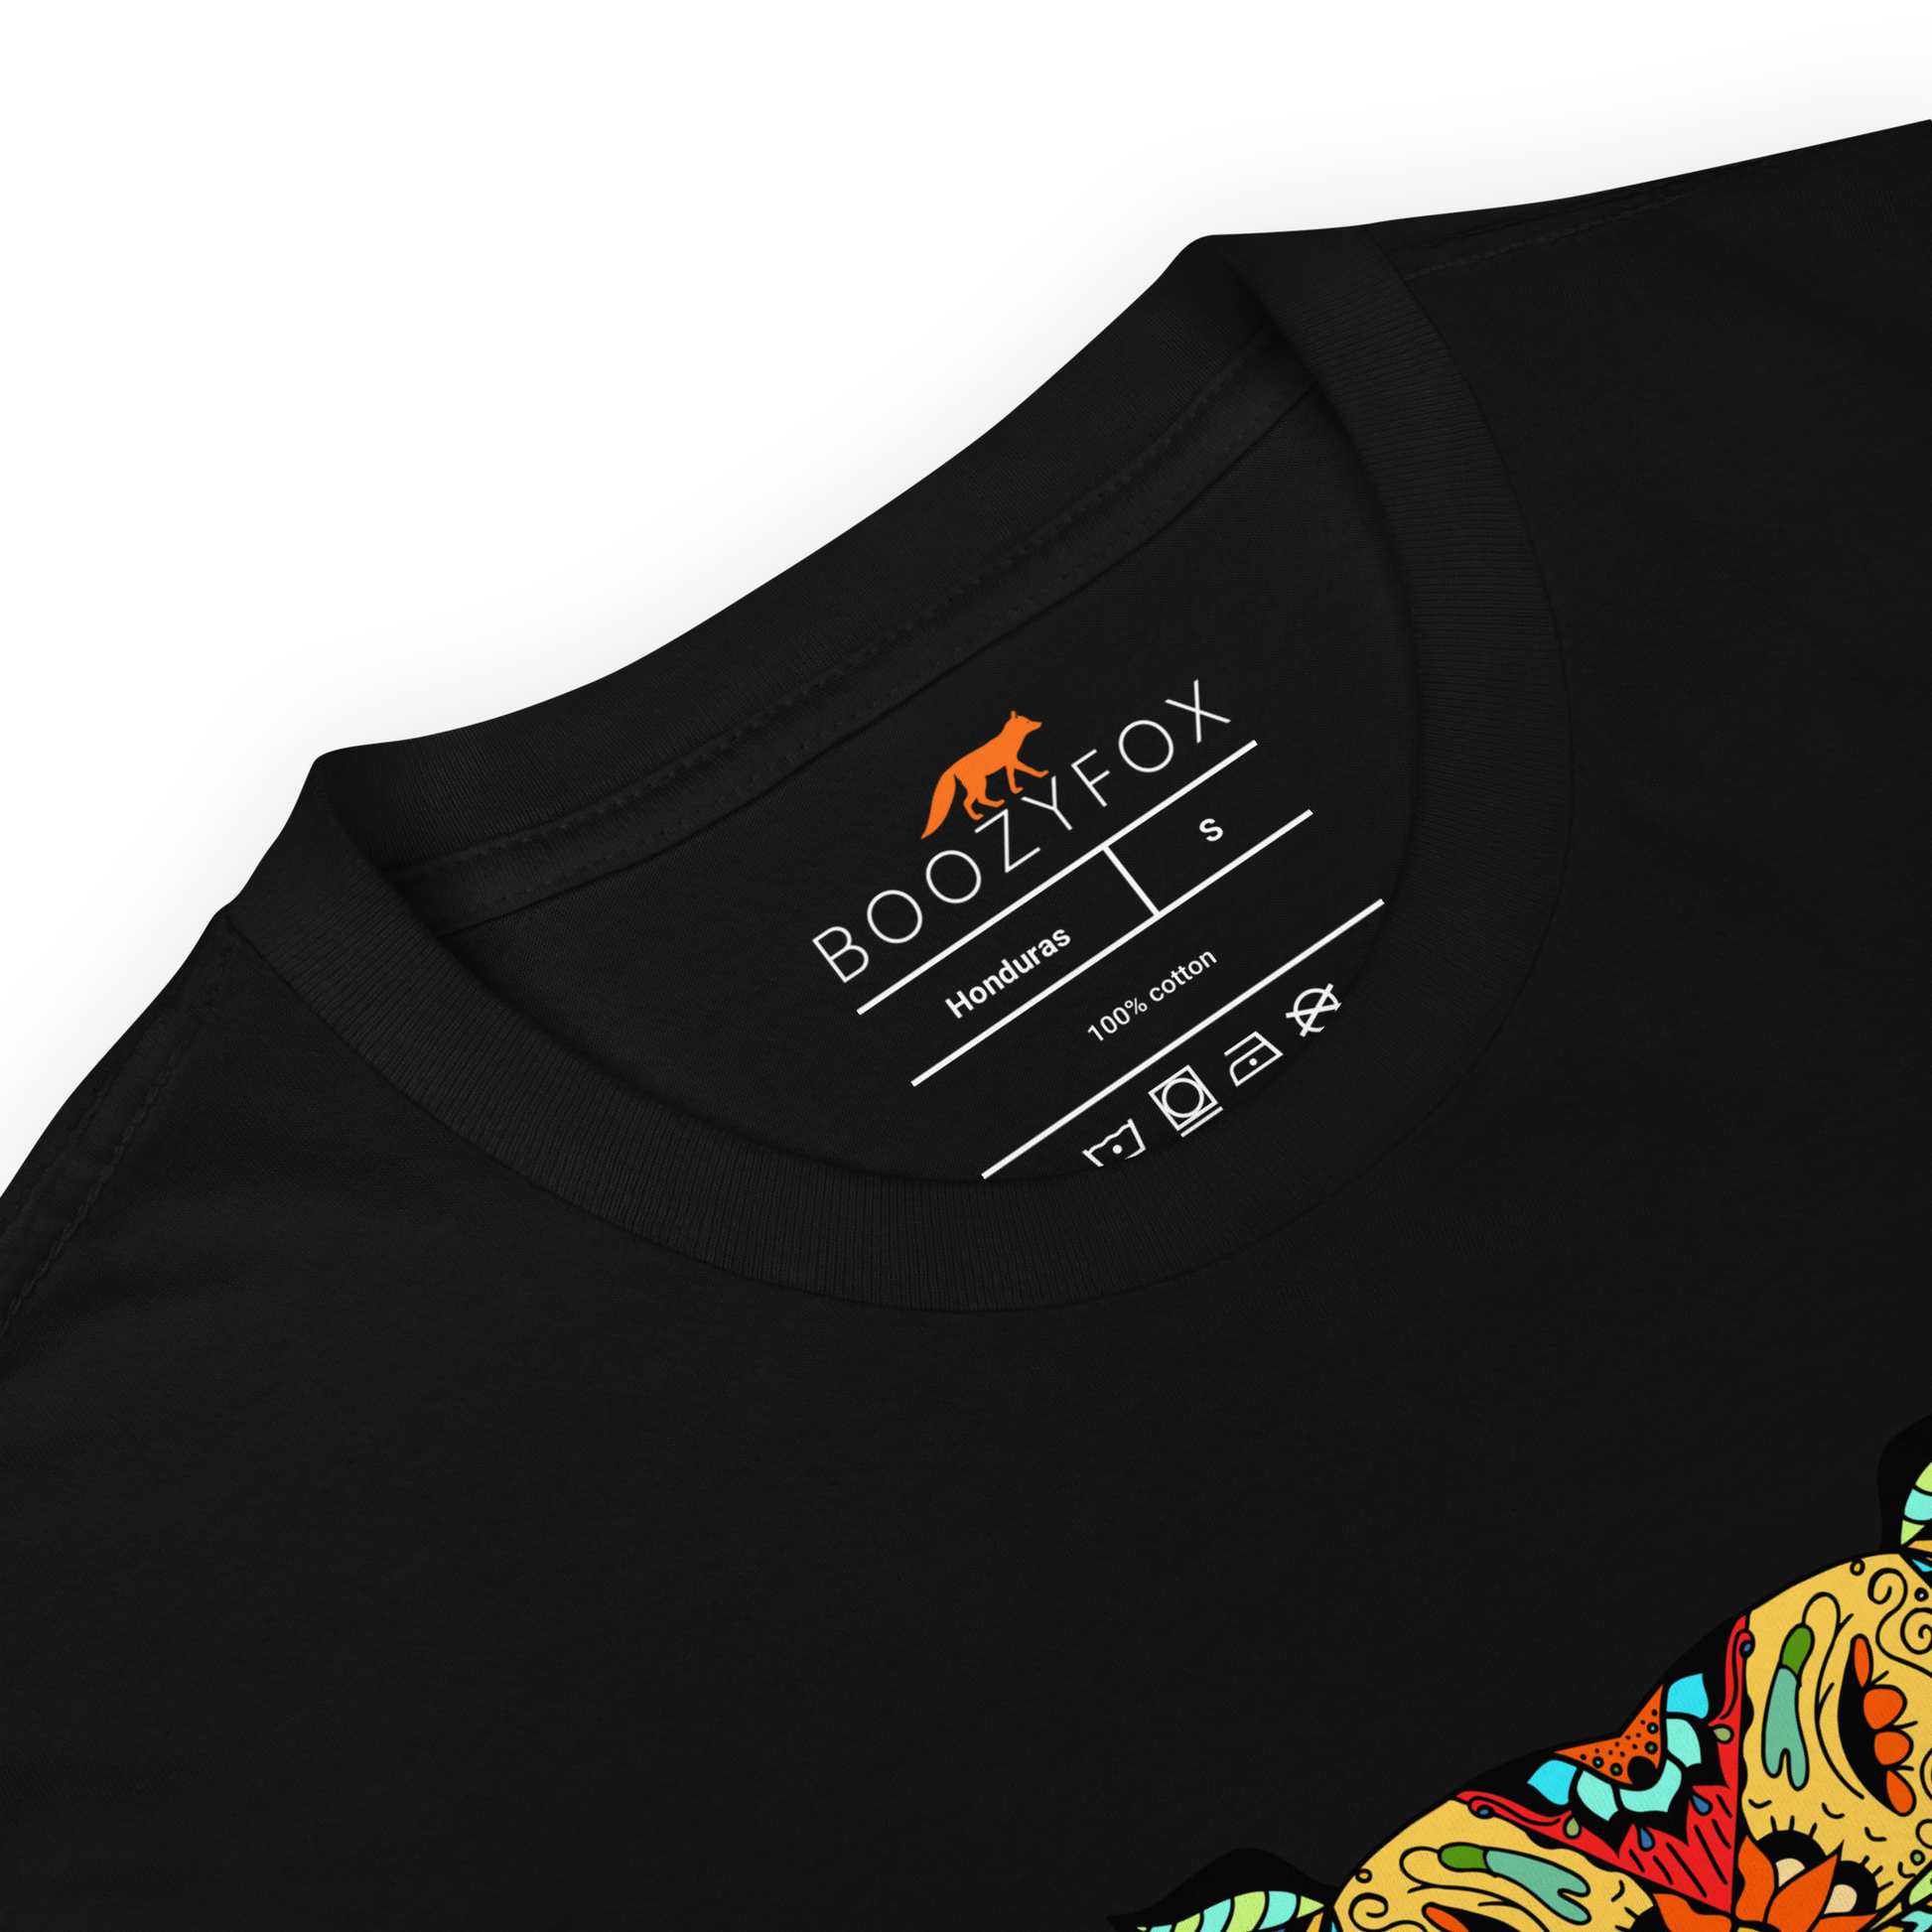 Product details of a Black Hippo T-Shirt featuring a mesmerizing Zentangle Hippo graphic on the chest - Cool Graphic Hippo T-Shirts - Boozy Fox